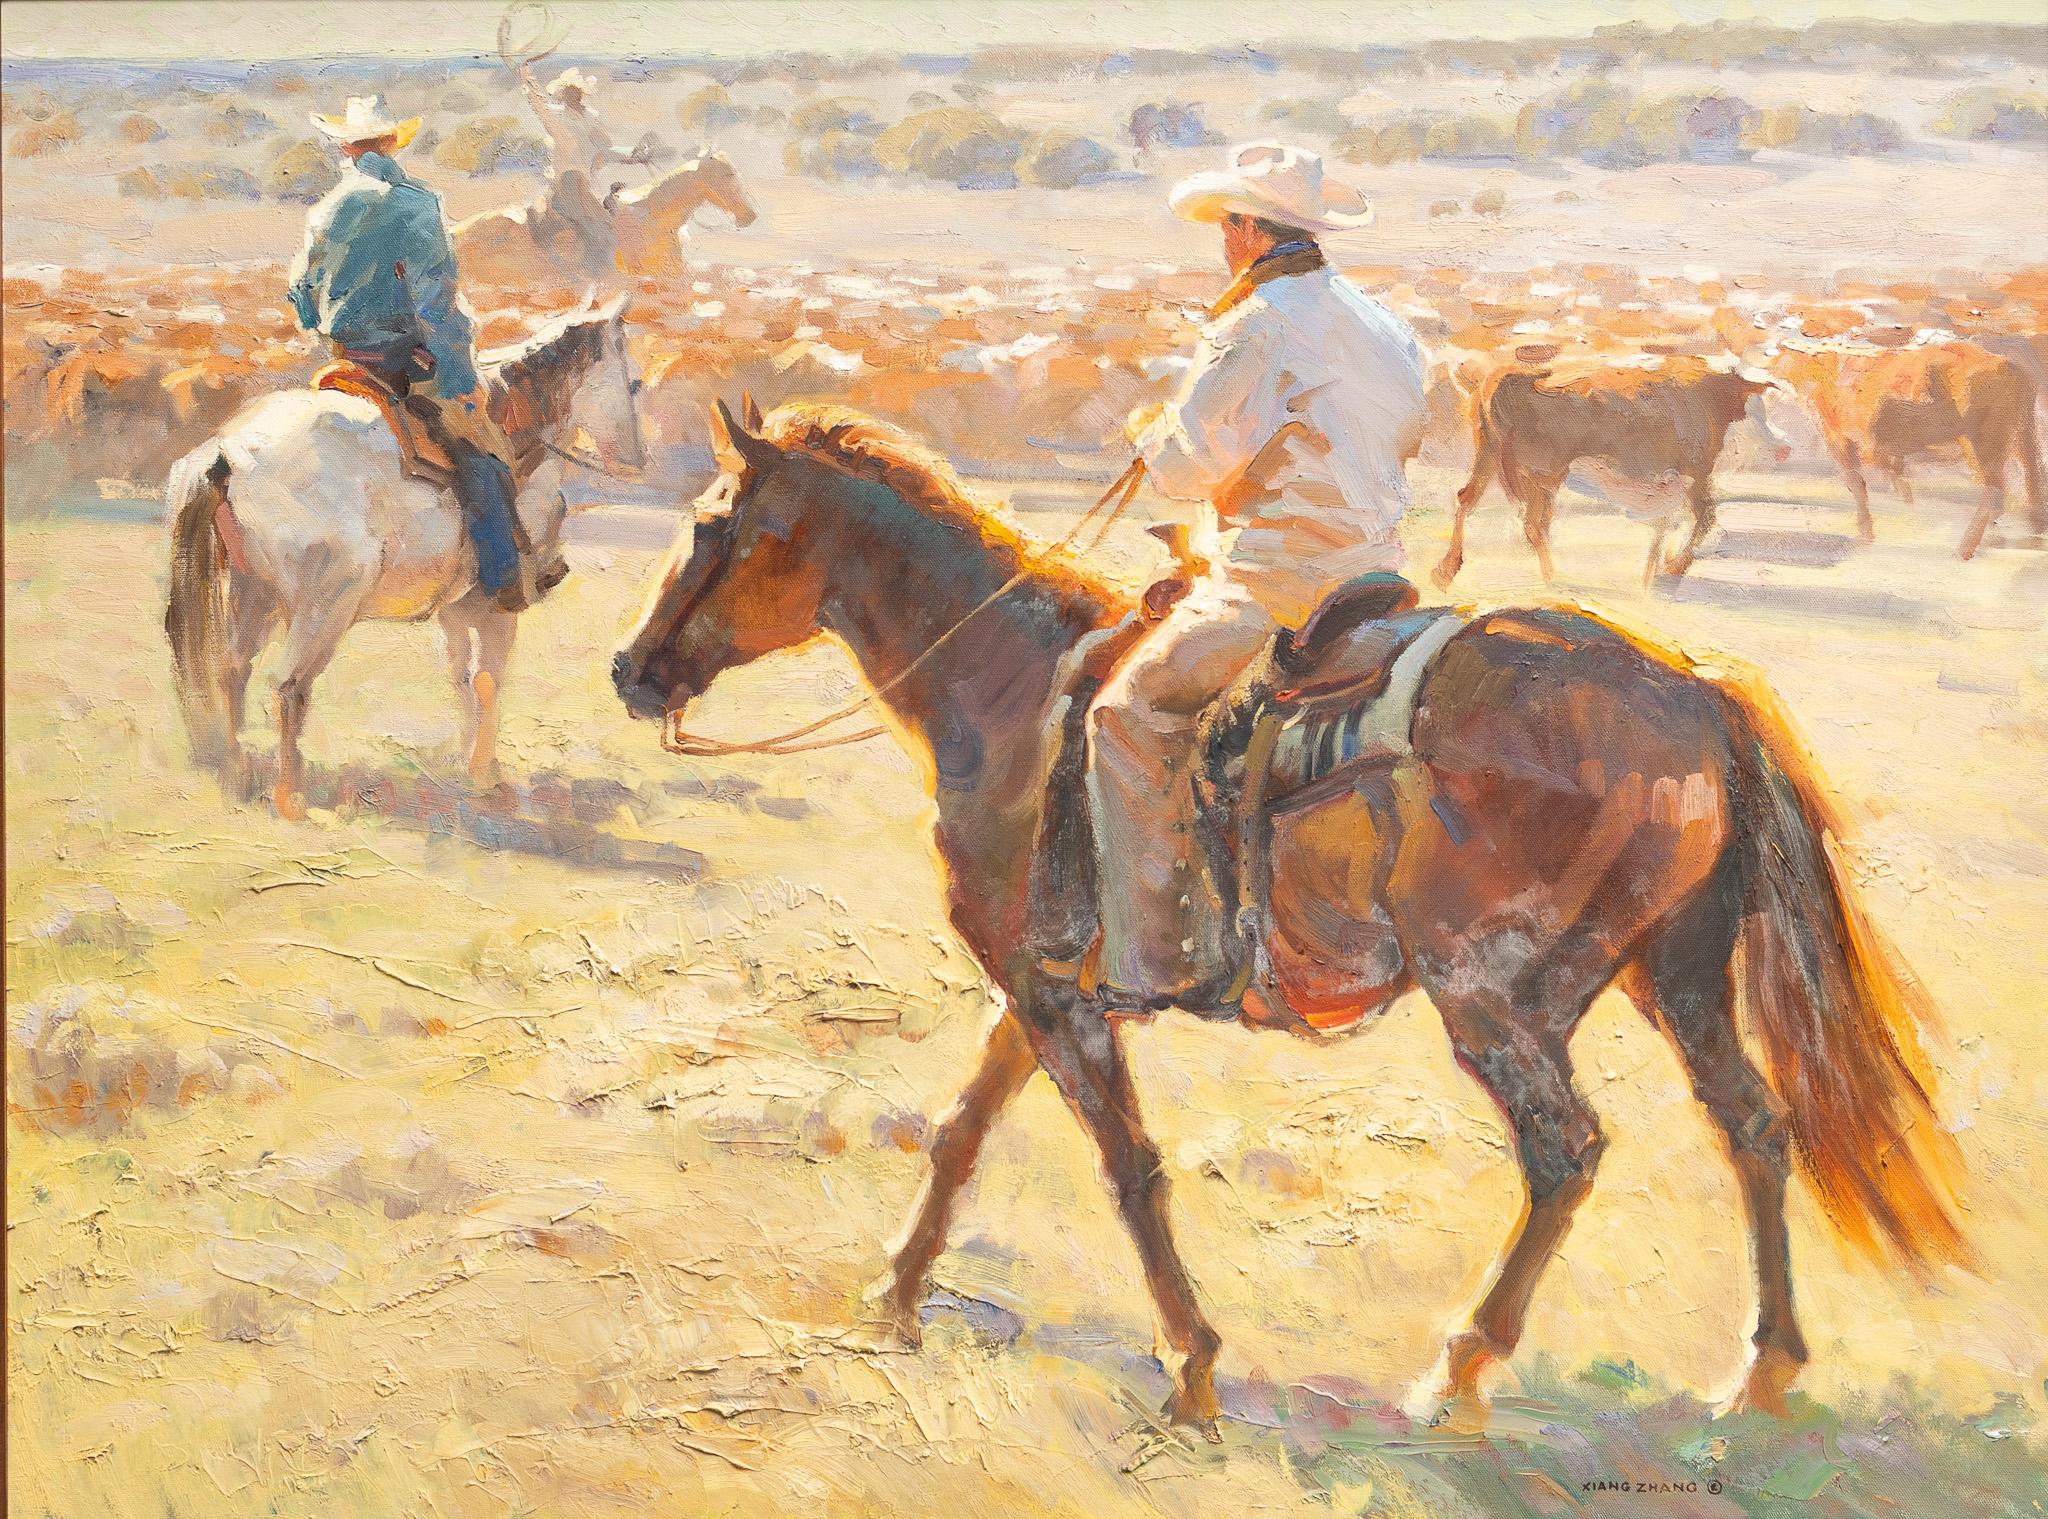 Xiang Zhang Figurative Painting - "A Santa Fe Ranch" Western Scene with Cowboys Horses Sunrise Landscape Cows Herd